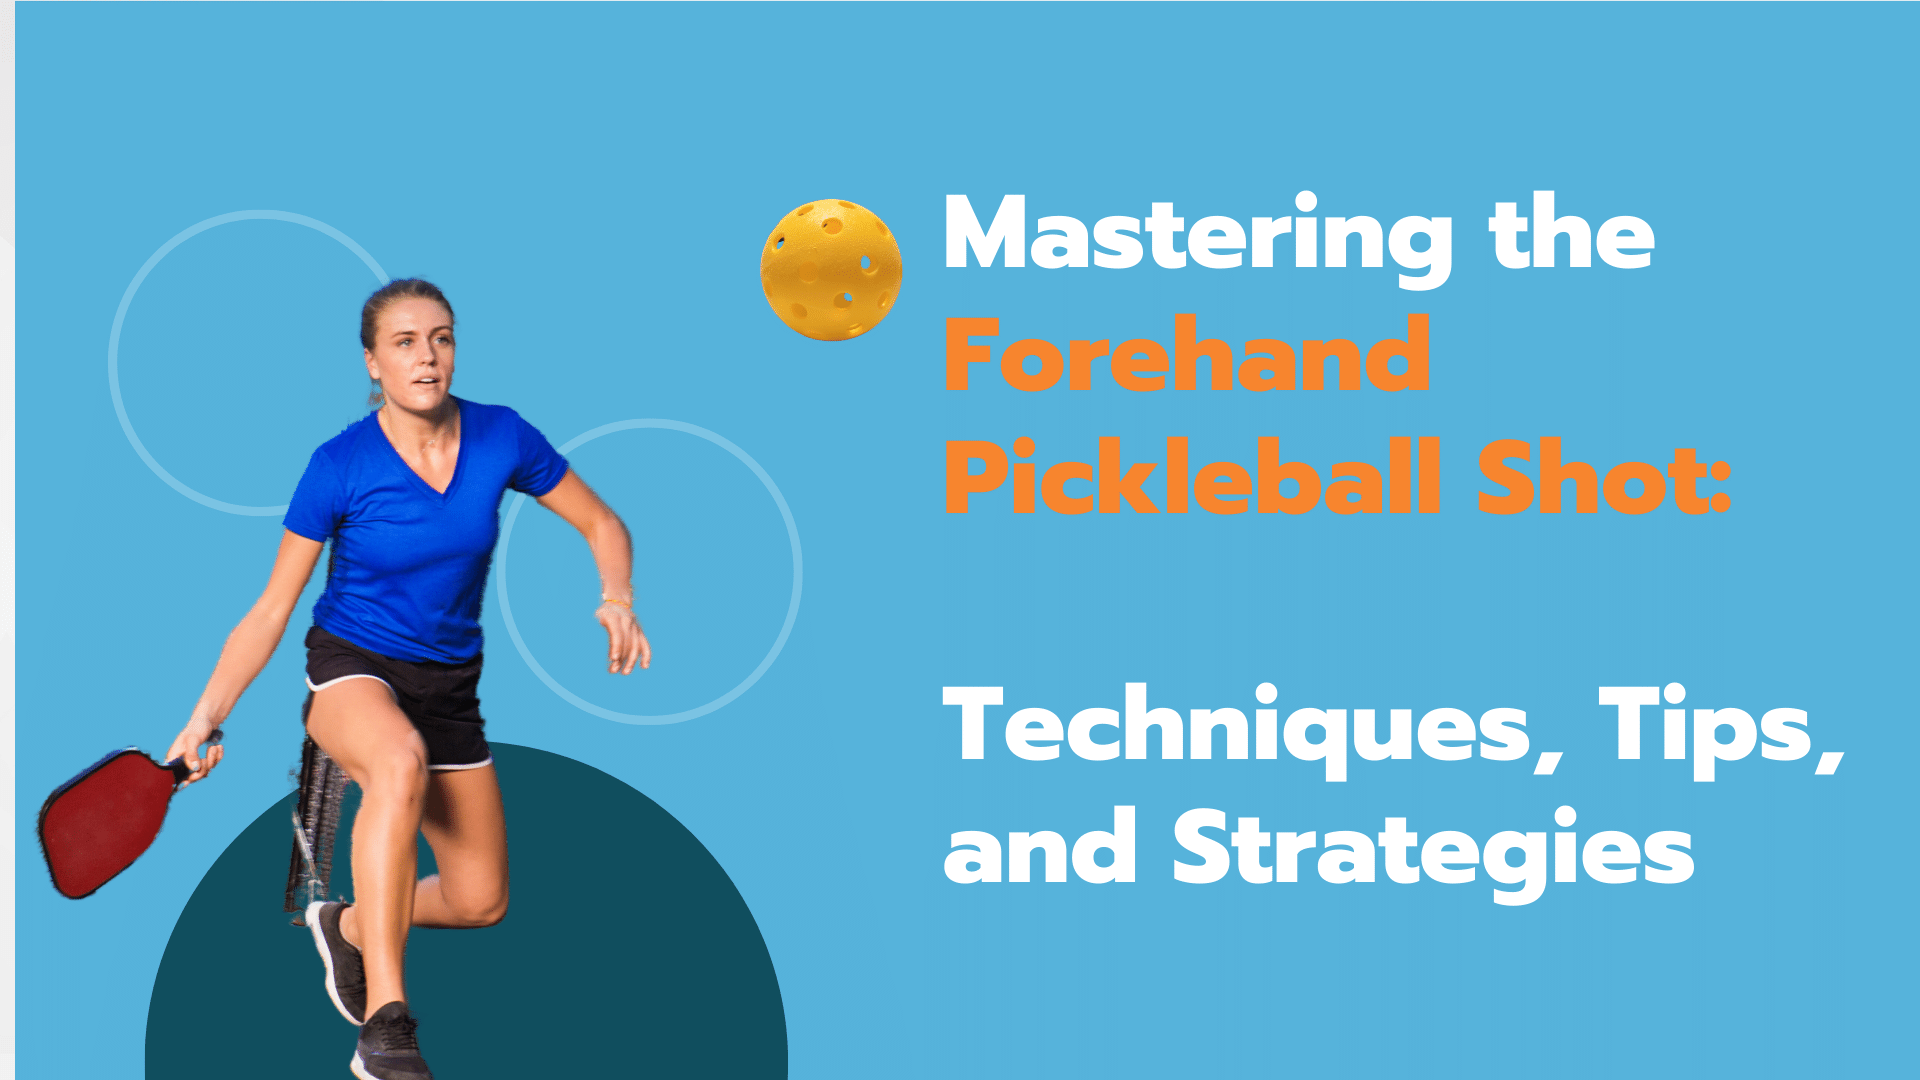 Mastering the Forehand Pickleball Shot: Techniques, Tips, and Strategies